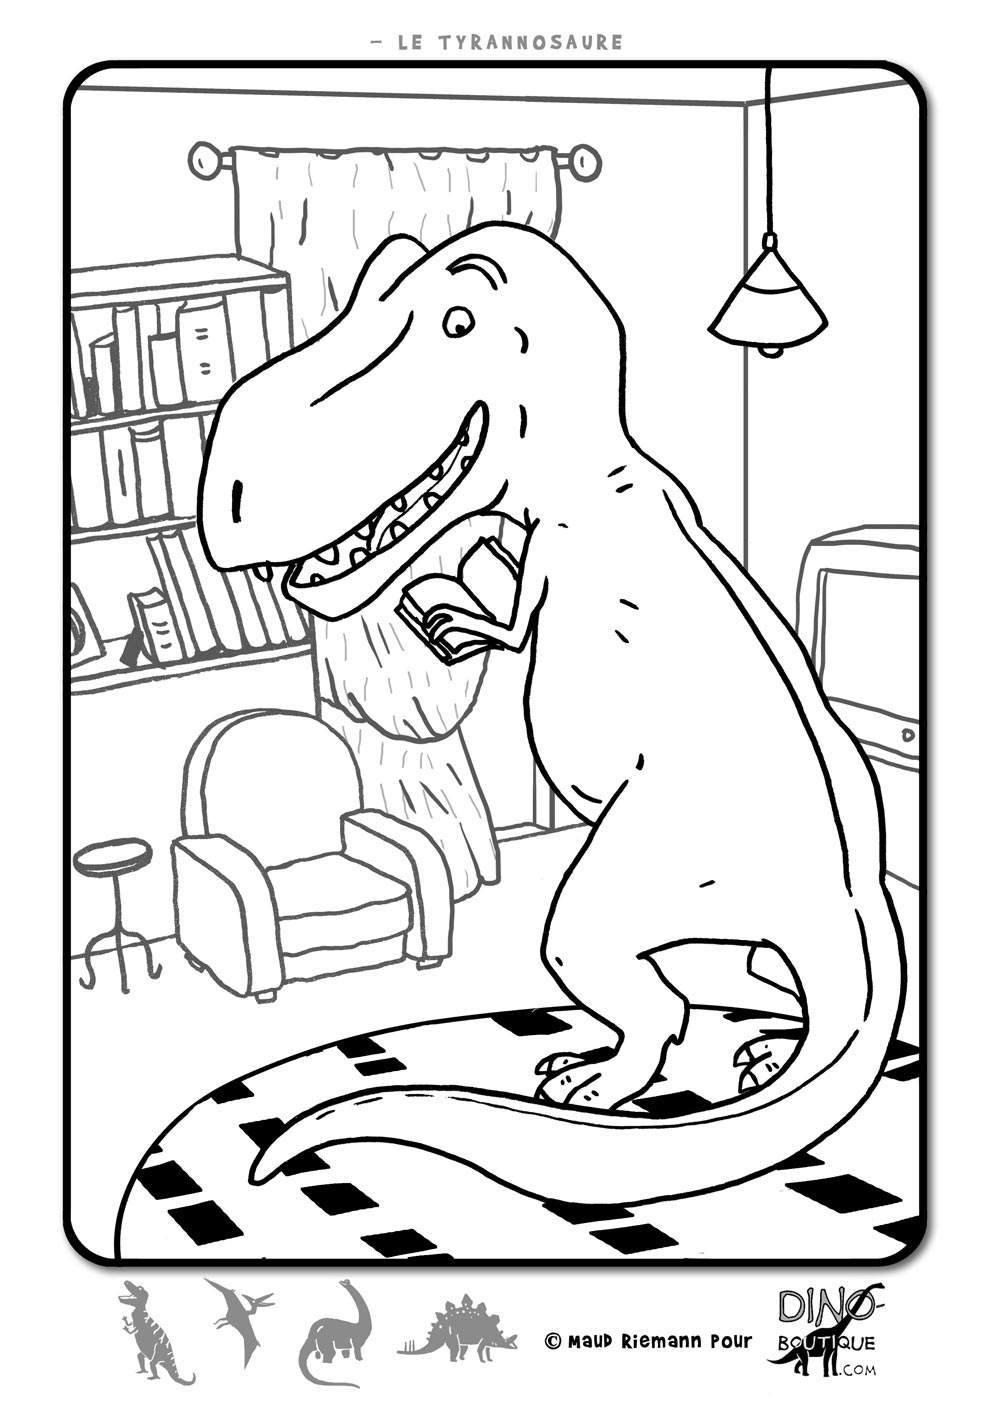 Dinosaurs To Print For Free : Funny T Rex - Dinosaurs Kids Coloring Pages à Dessin Dino 